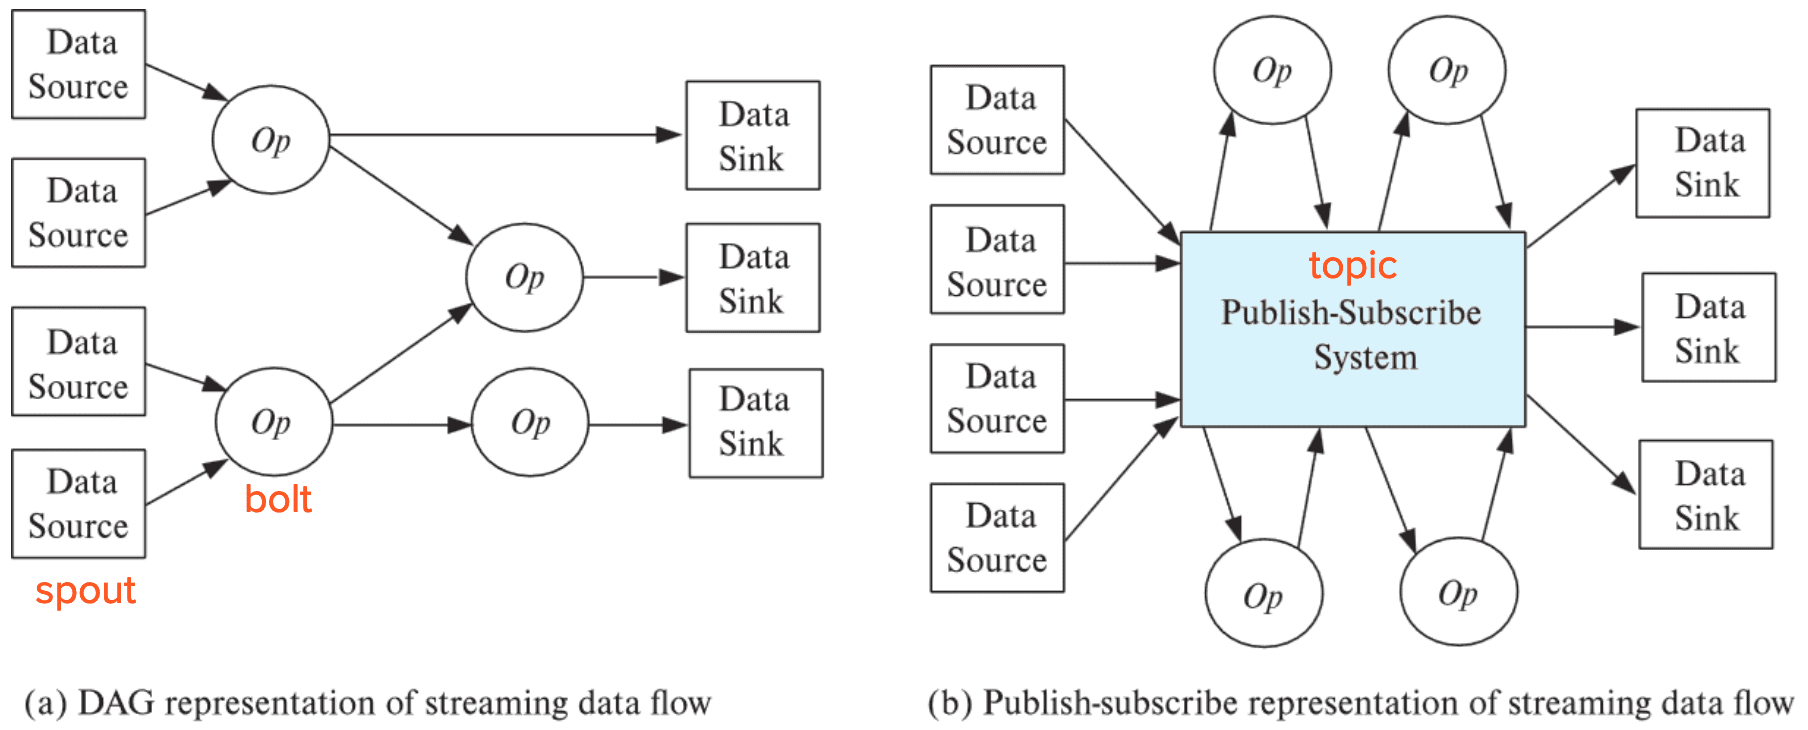 Routing of streams using DAG and publish-subscribe representations